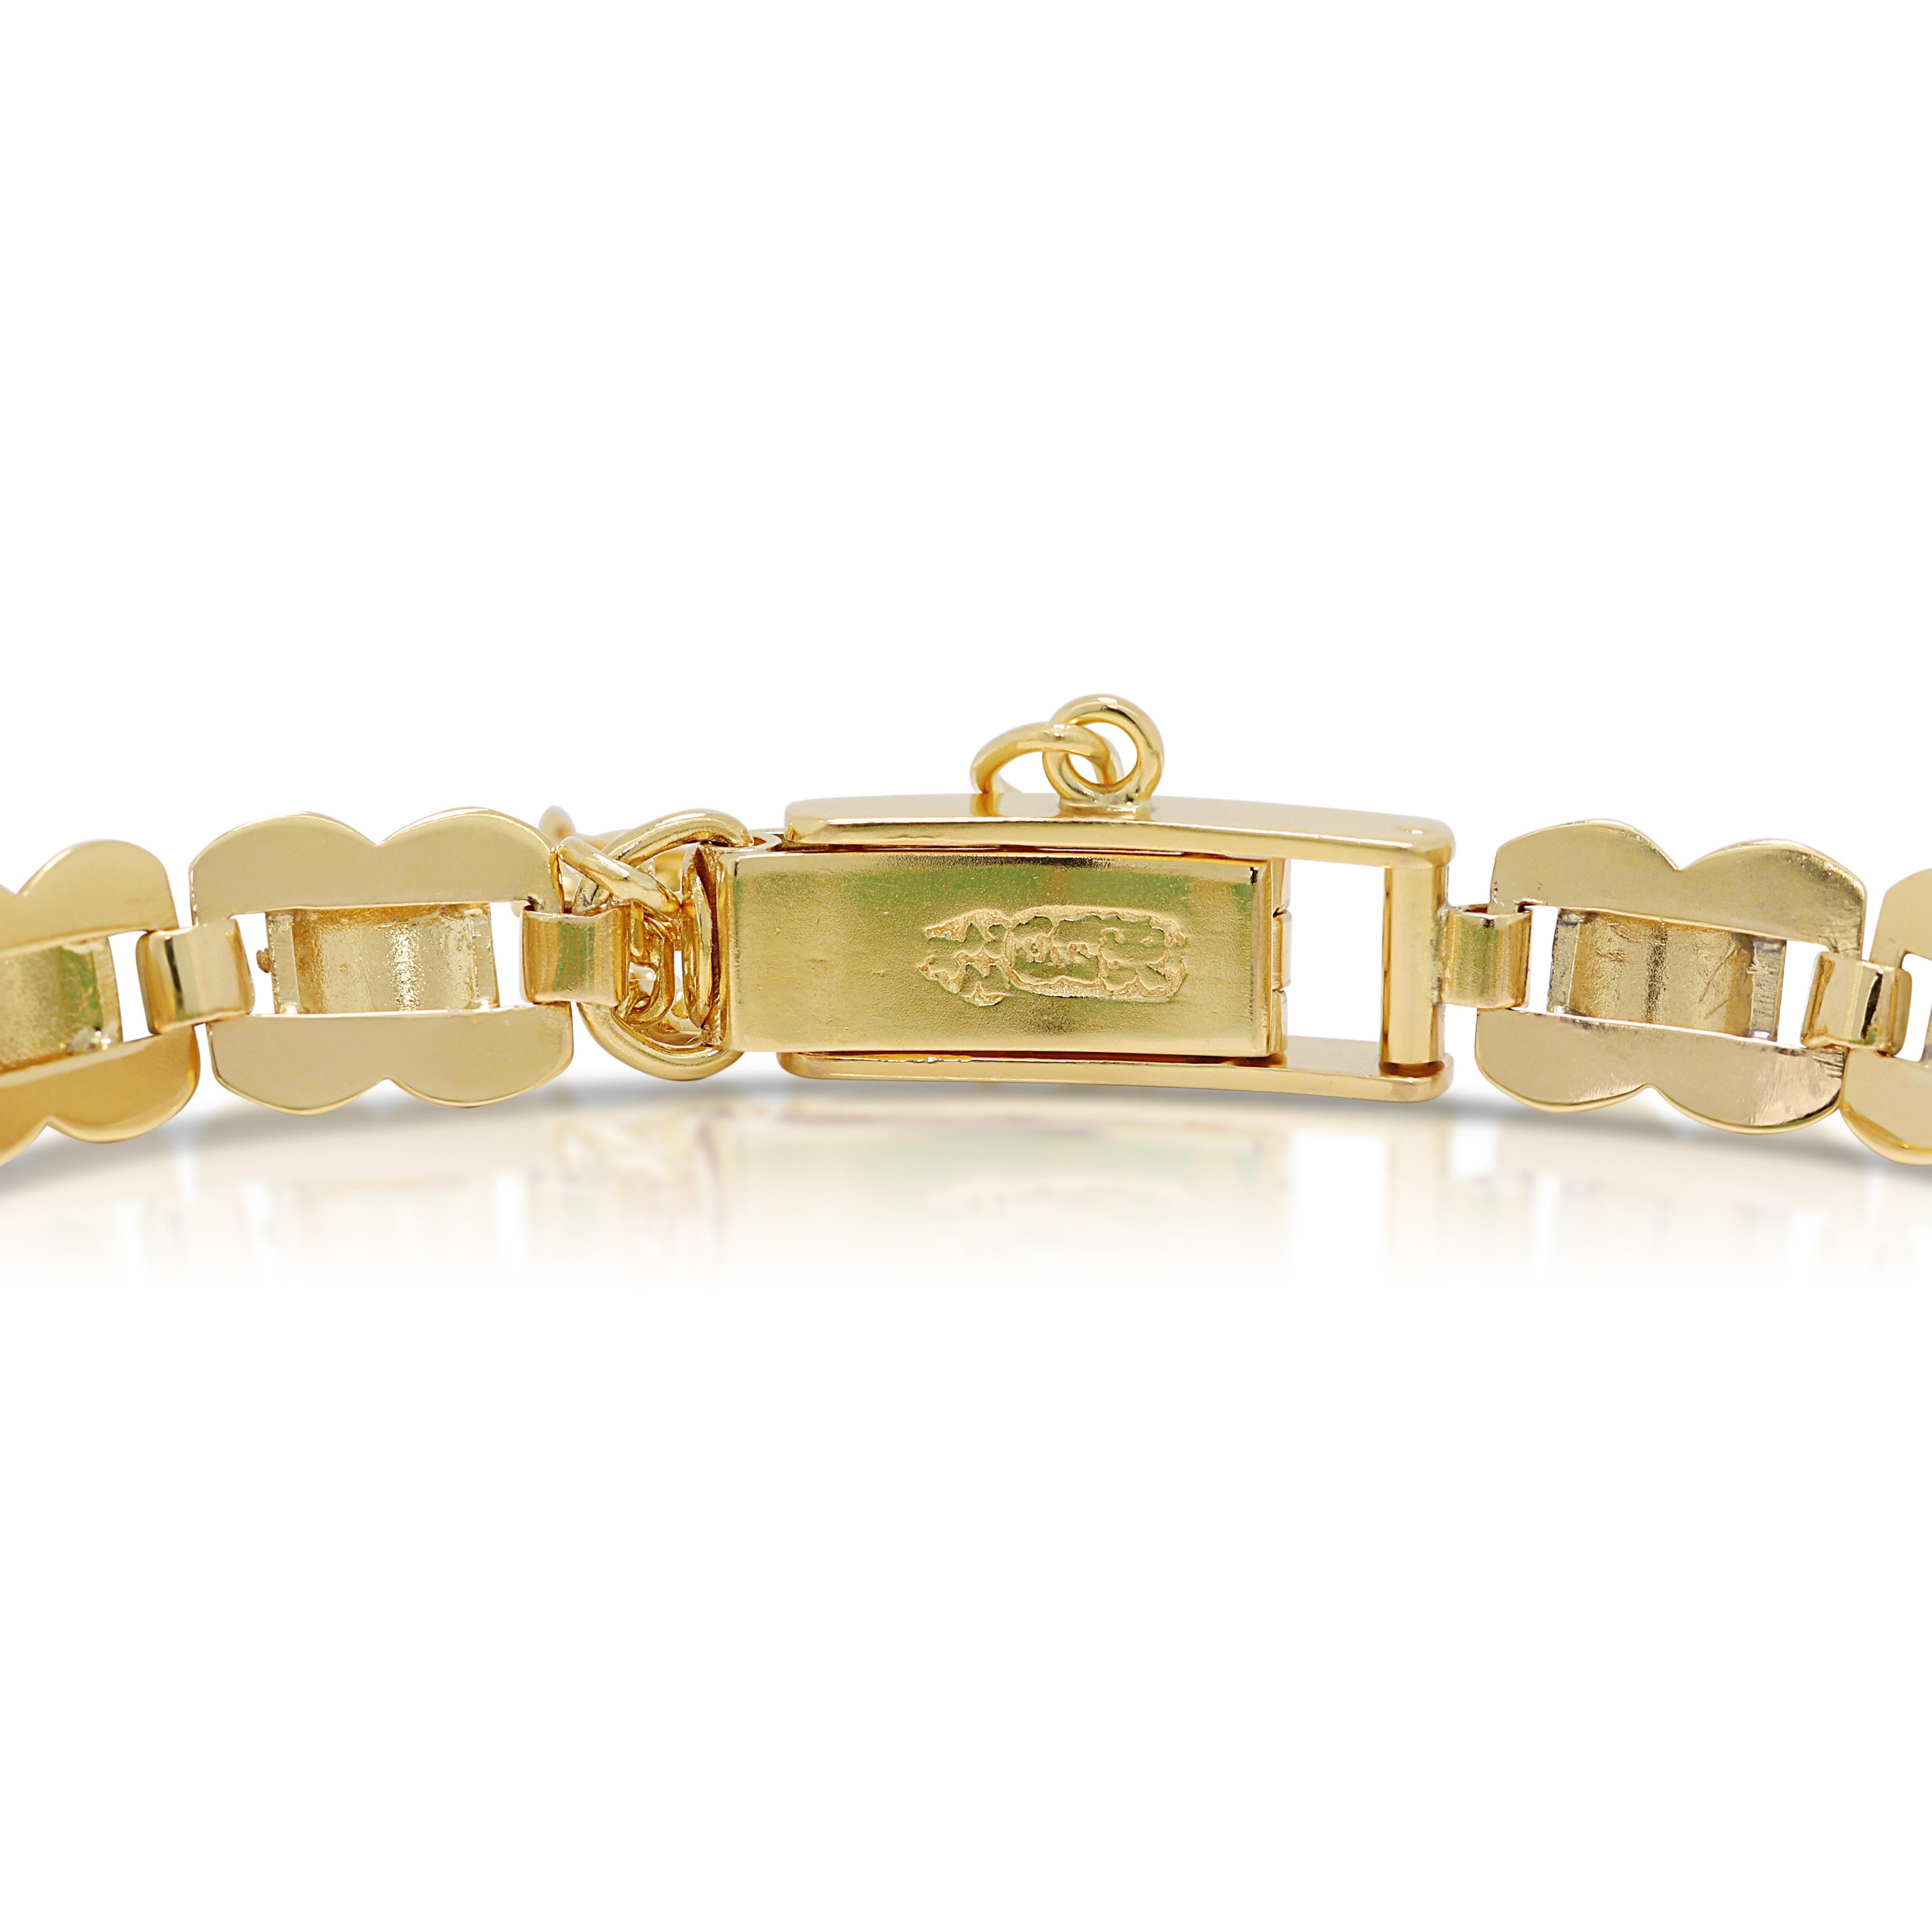 Magnificent 19.17ct Jade-Cabochon Bracelet in 22k Yellow Gold 1